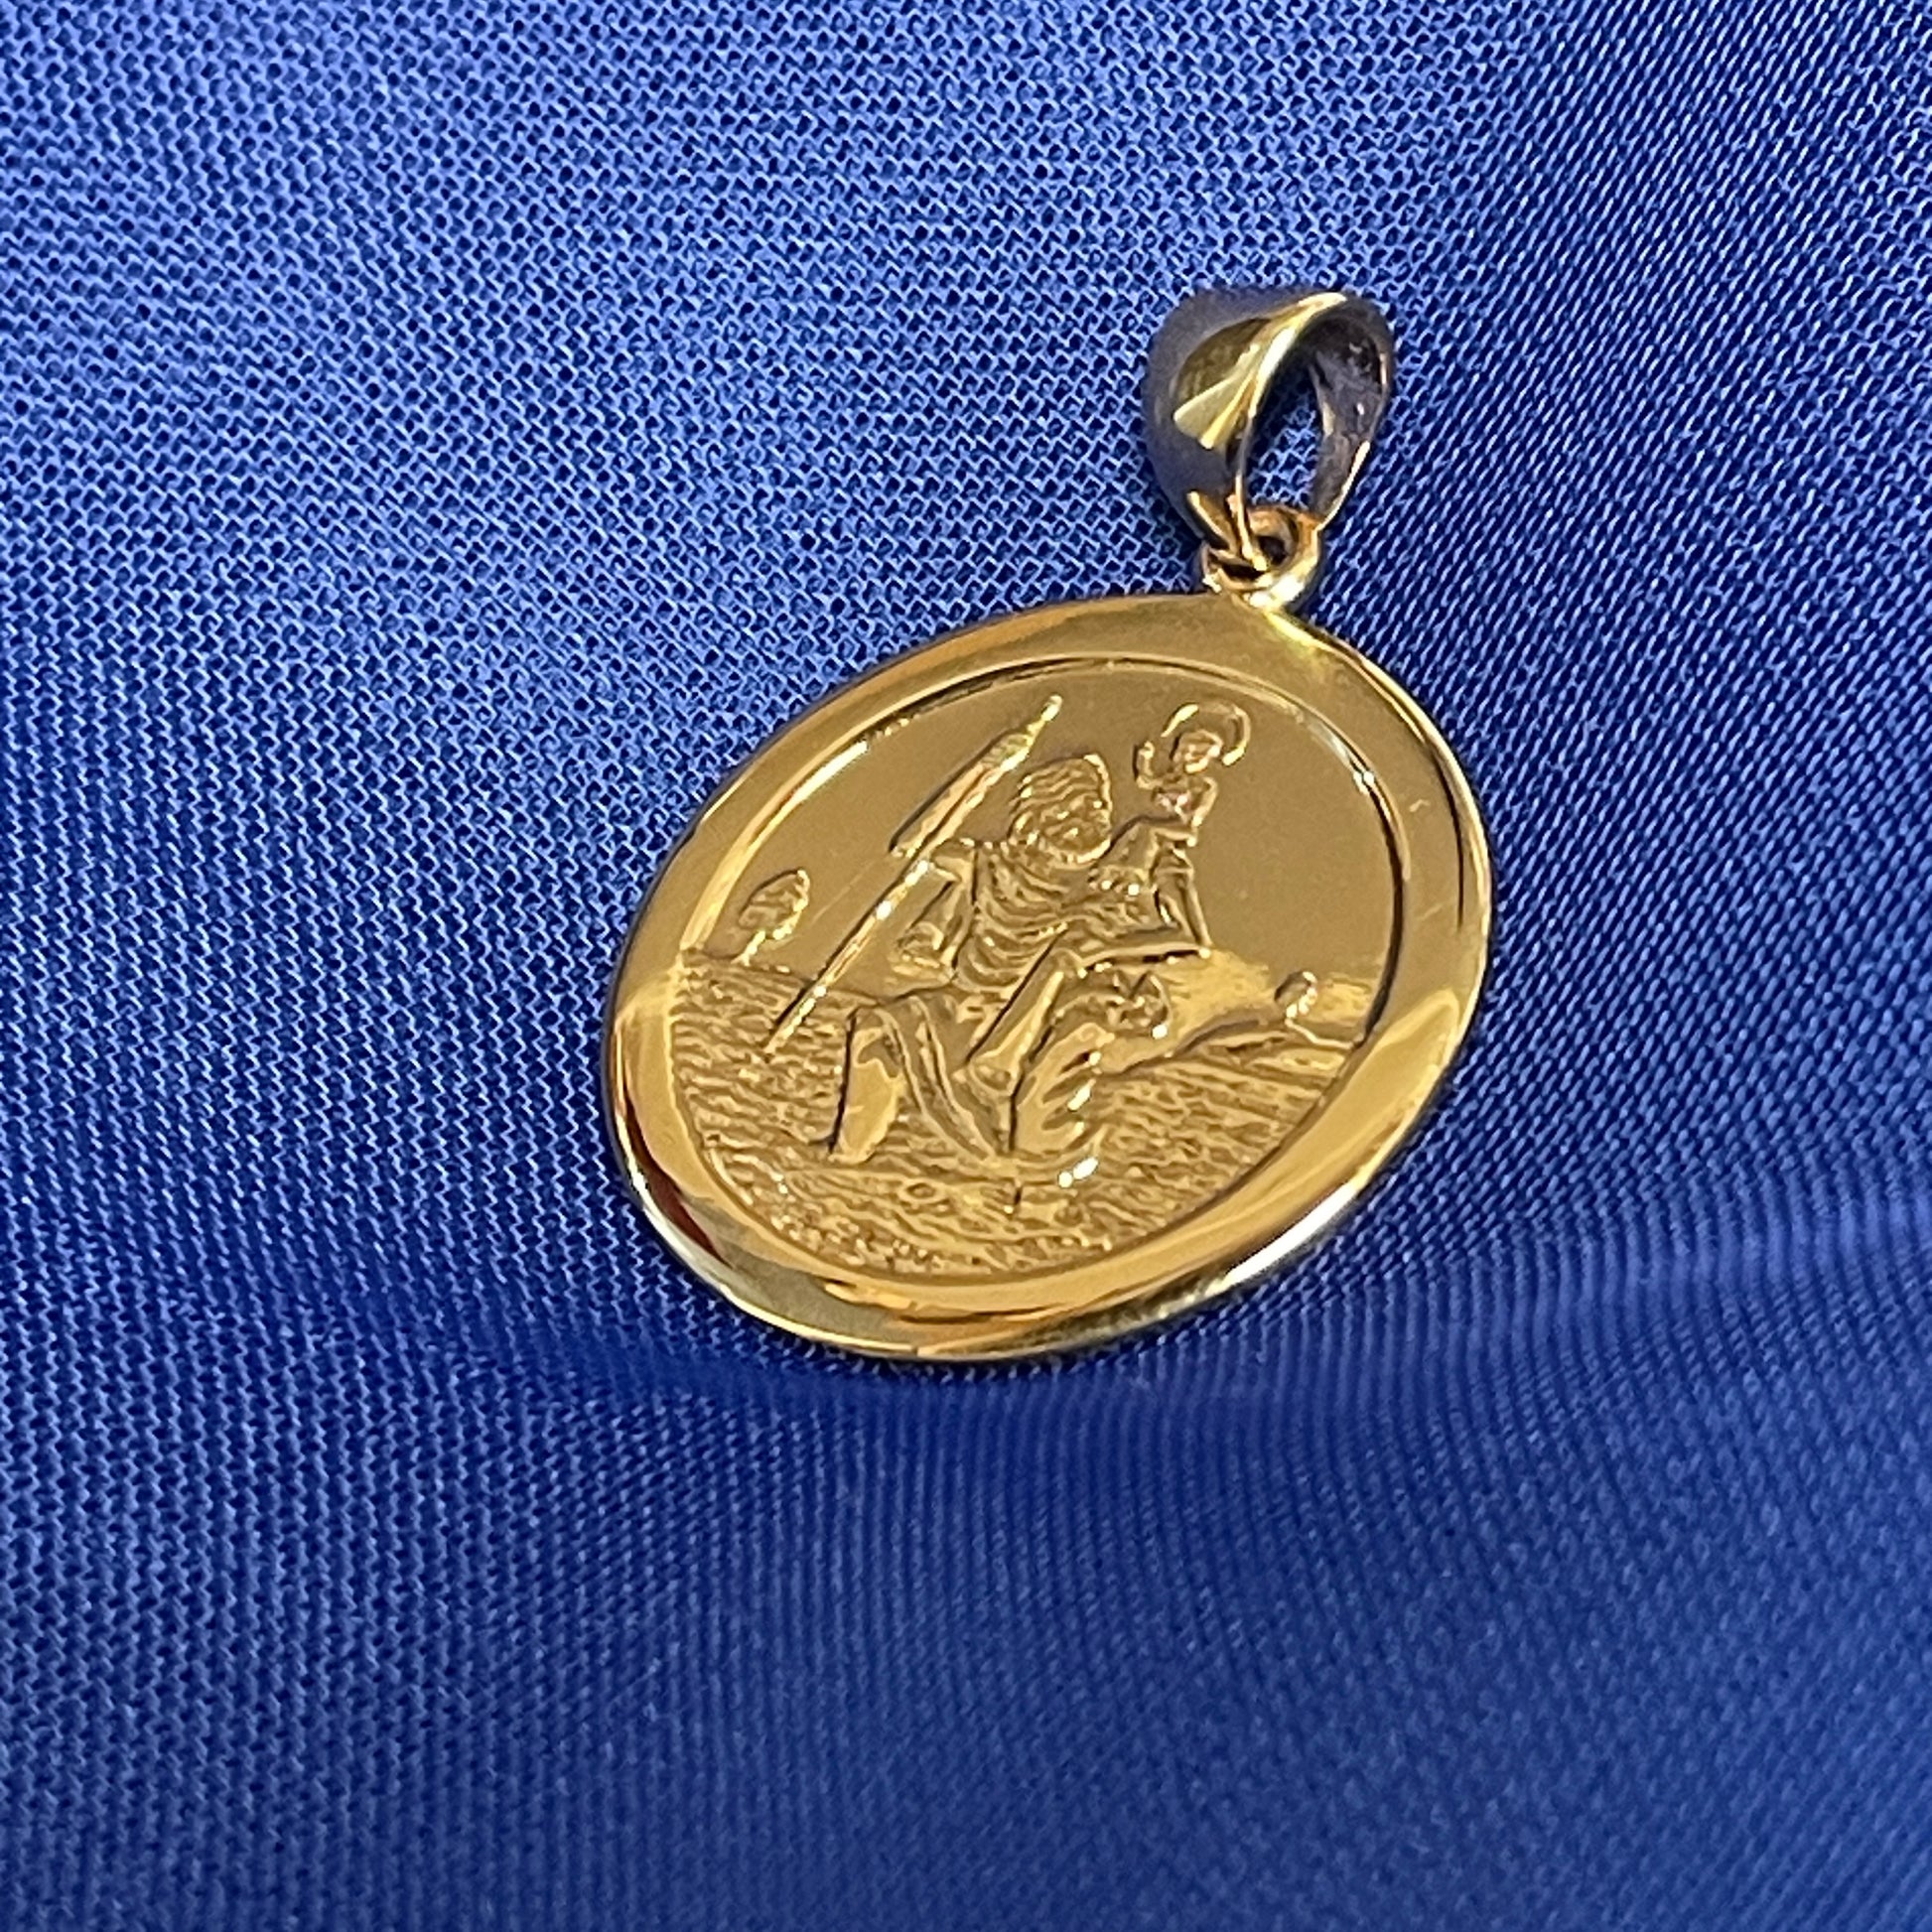 St. Christopher solid round 9 carat yellow gold 22 mm